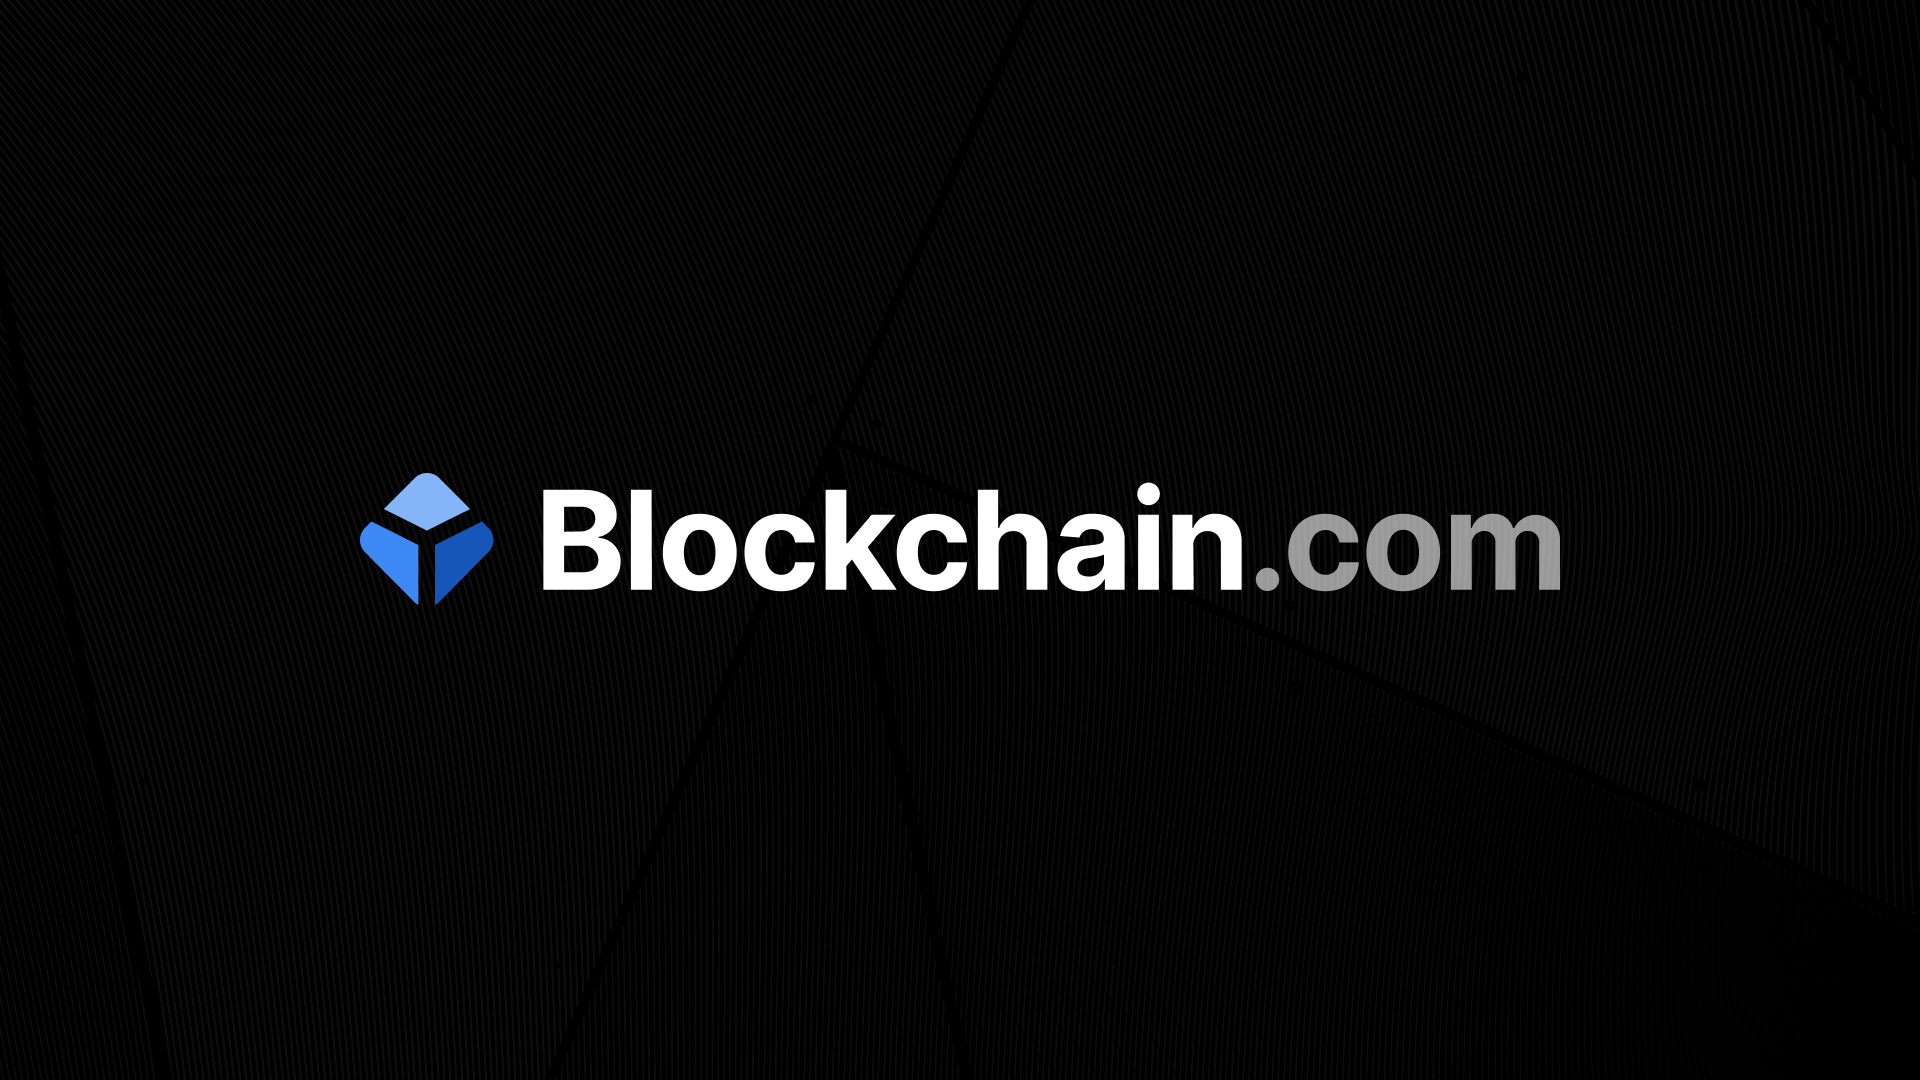 Blockchain.com Obtains Payments License from MAS